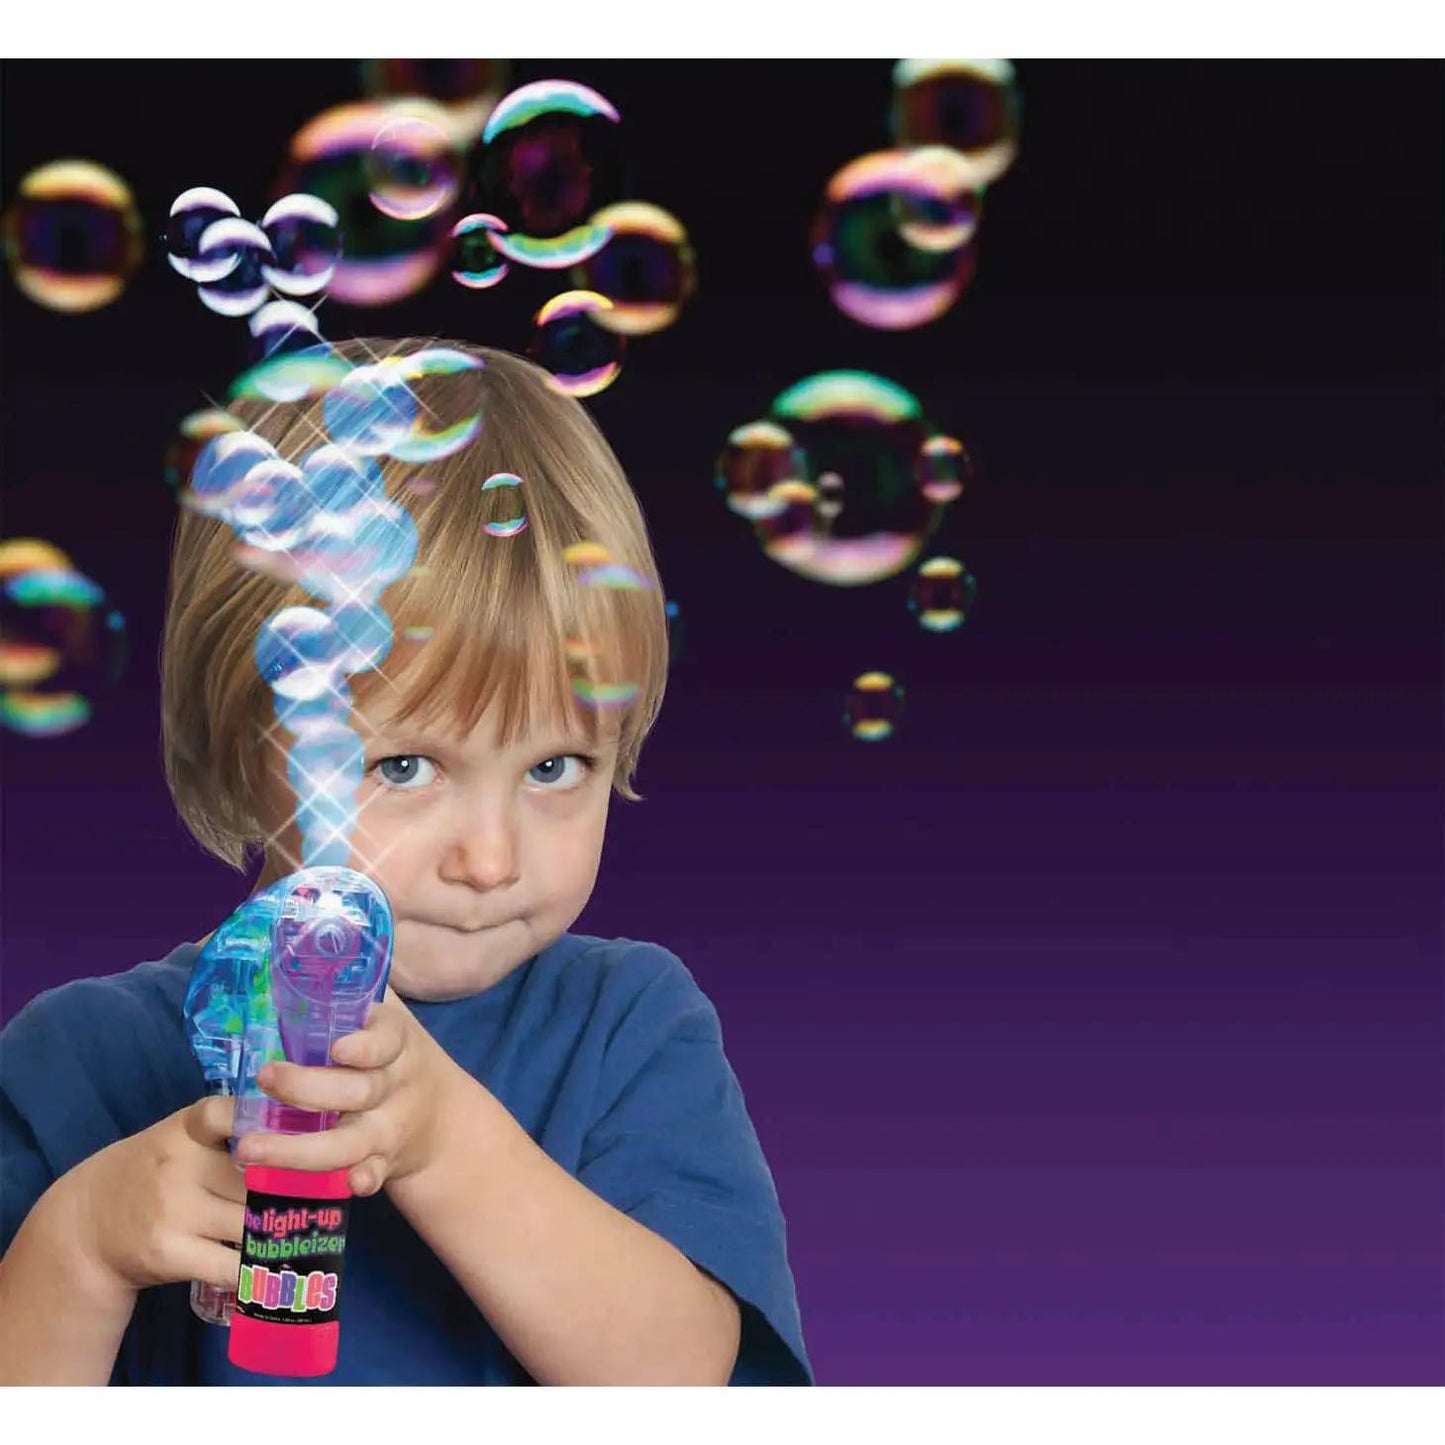 can you imagine light up bubbleizer bubble blowing toy